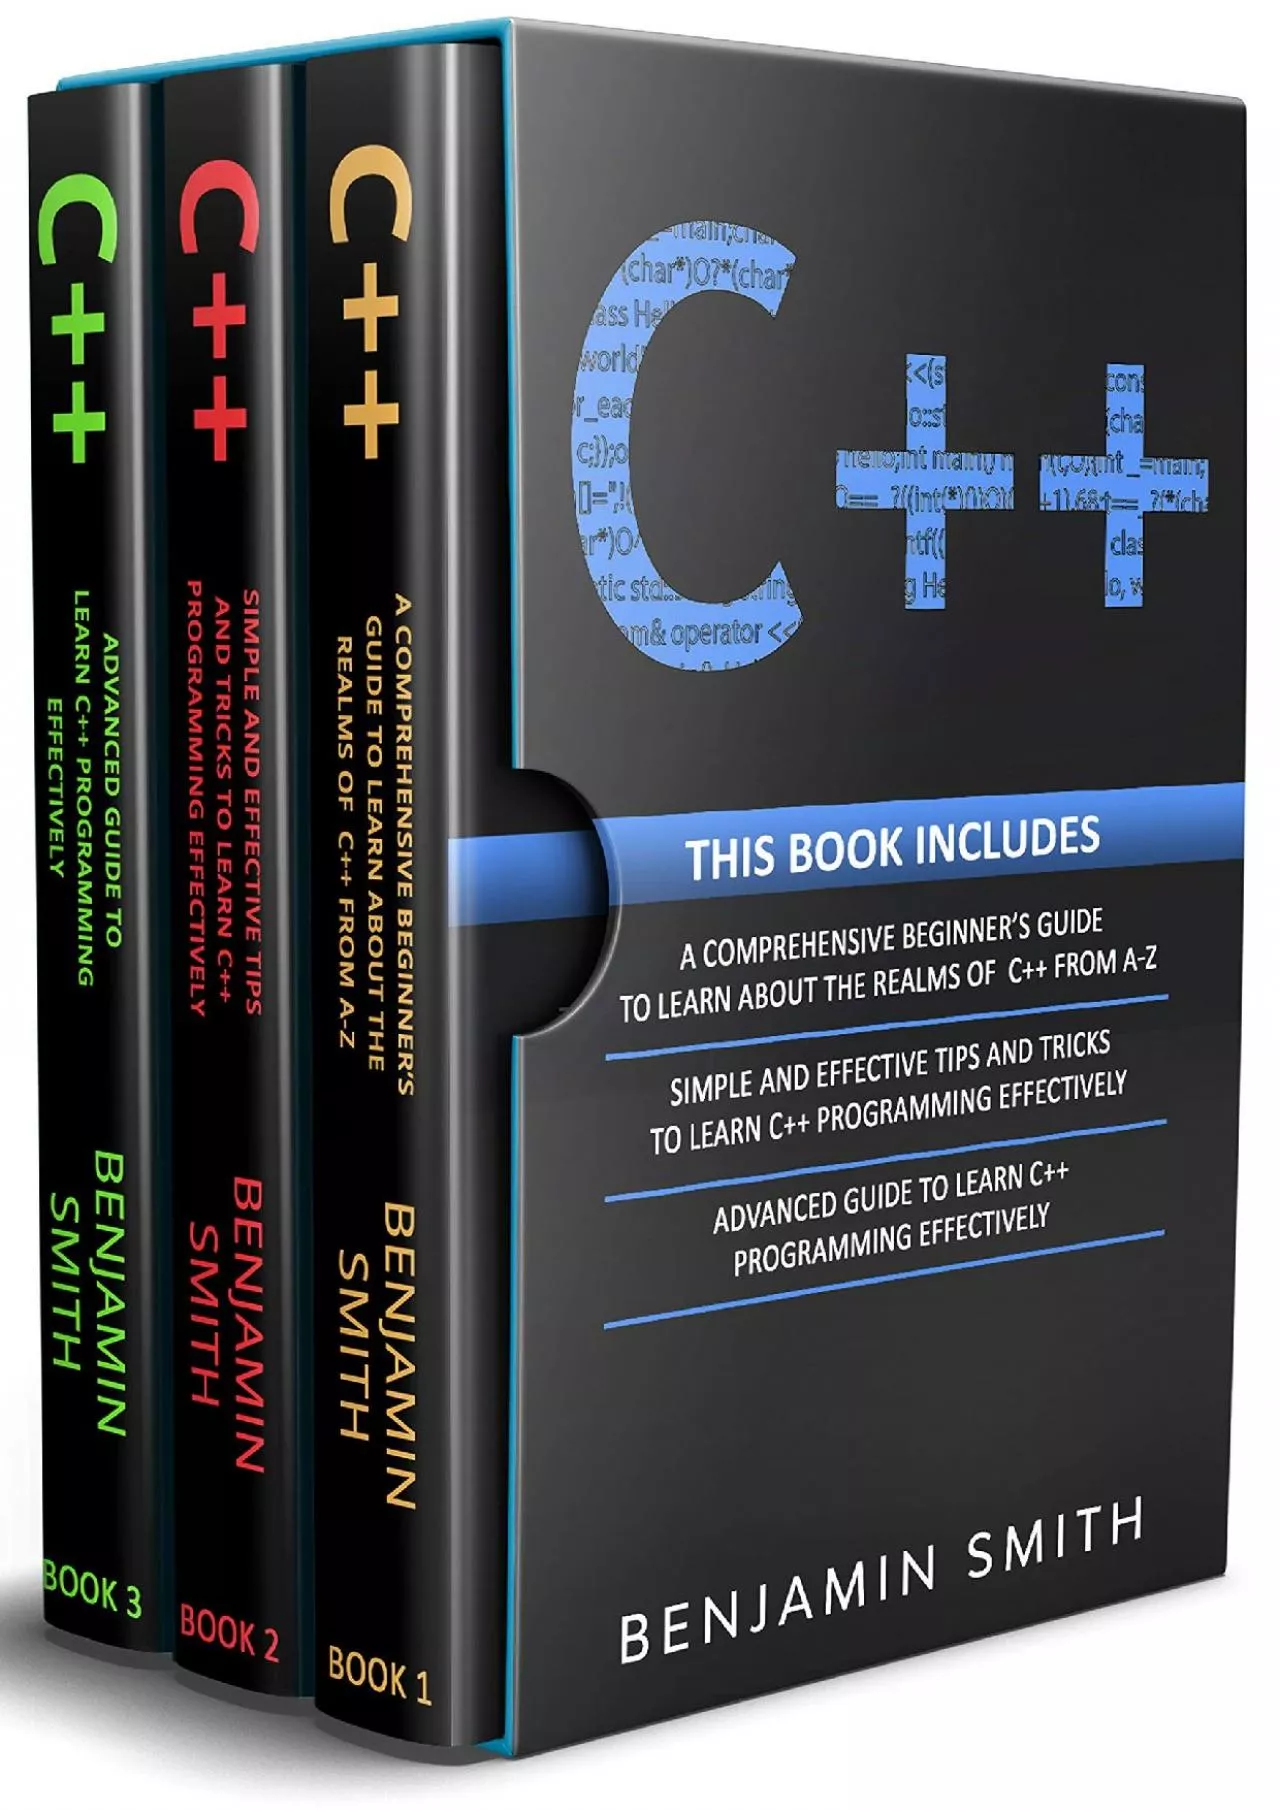 [READING BOOK]-C++: 3 in 1- Beginner\'s Guide+ Simple and Effective Tips and Tricks+ Advanced